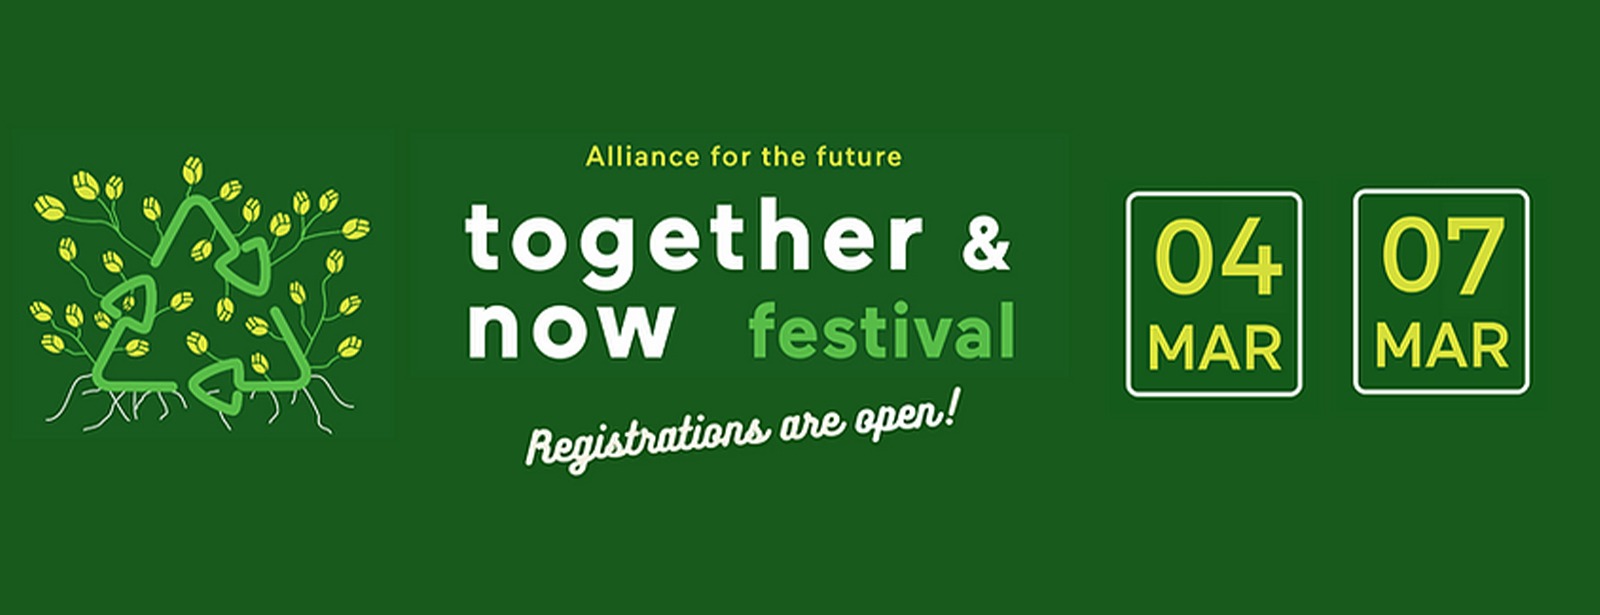 Dubai’s first festival for eco-citizens: ‘together&now” – Alliance for the future’ - Coming Soon in UAE